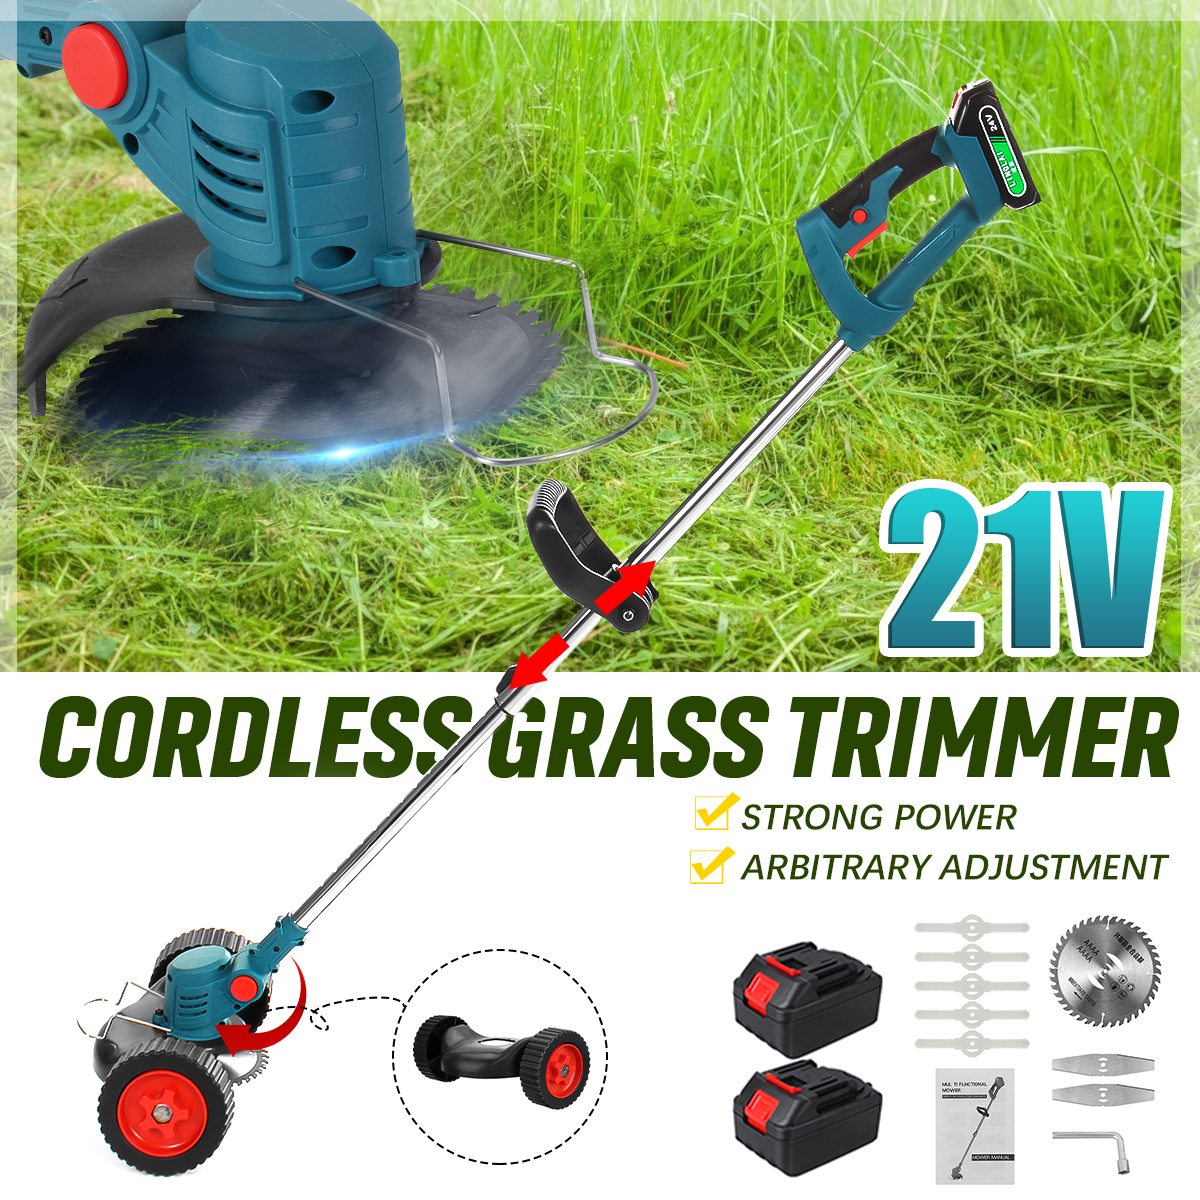 21V-Electric-Lawn-Mower-Cordless-Grass-Trimmer-Cutter-Pruning-Weed-Garden-Tools-1843011-1